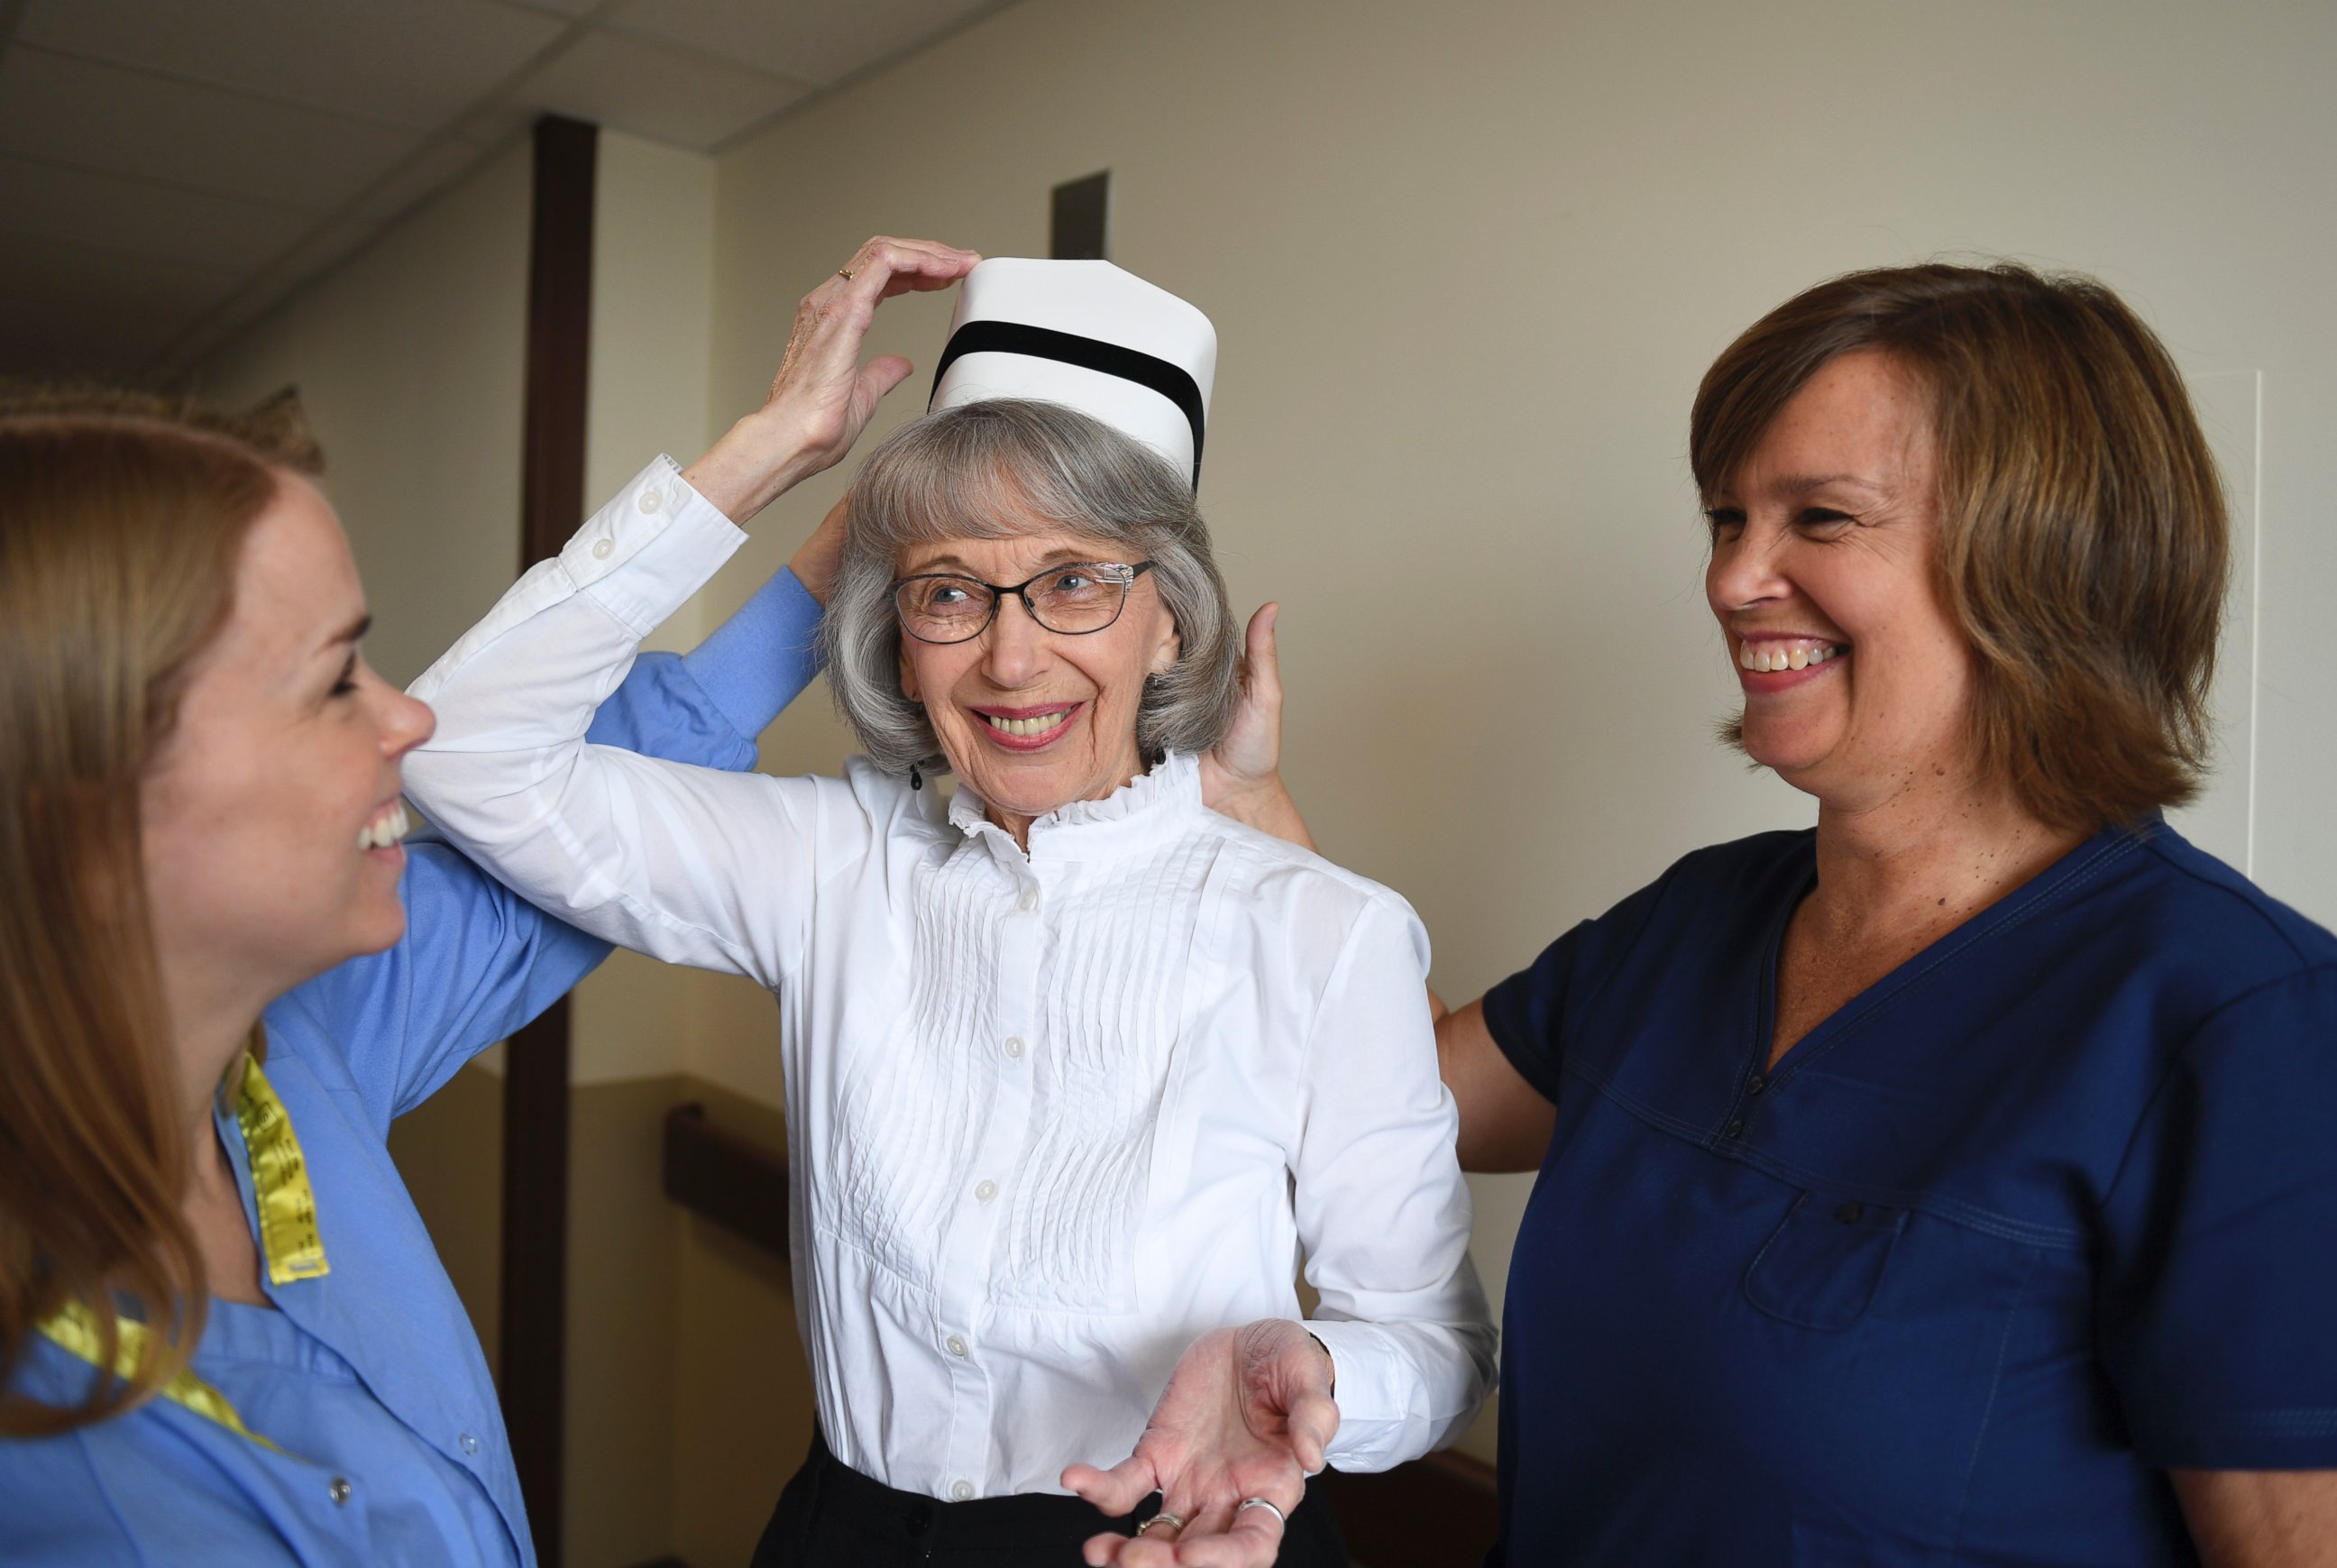 PHOTO: Left to right; Christina Harms, 31, Mary Lou Wilkins, 86, and Sue Hoekstra, 56, are photographed at Spectrum Health in Grand Rapids, Michigan.